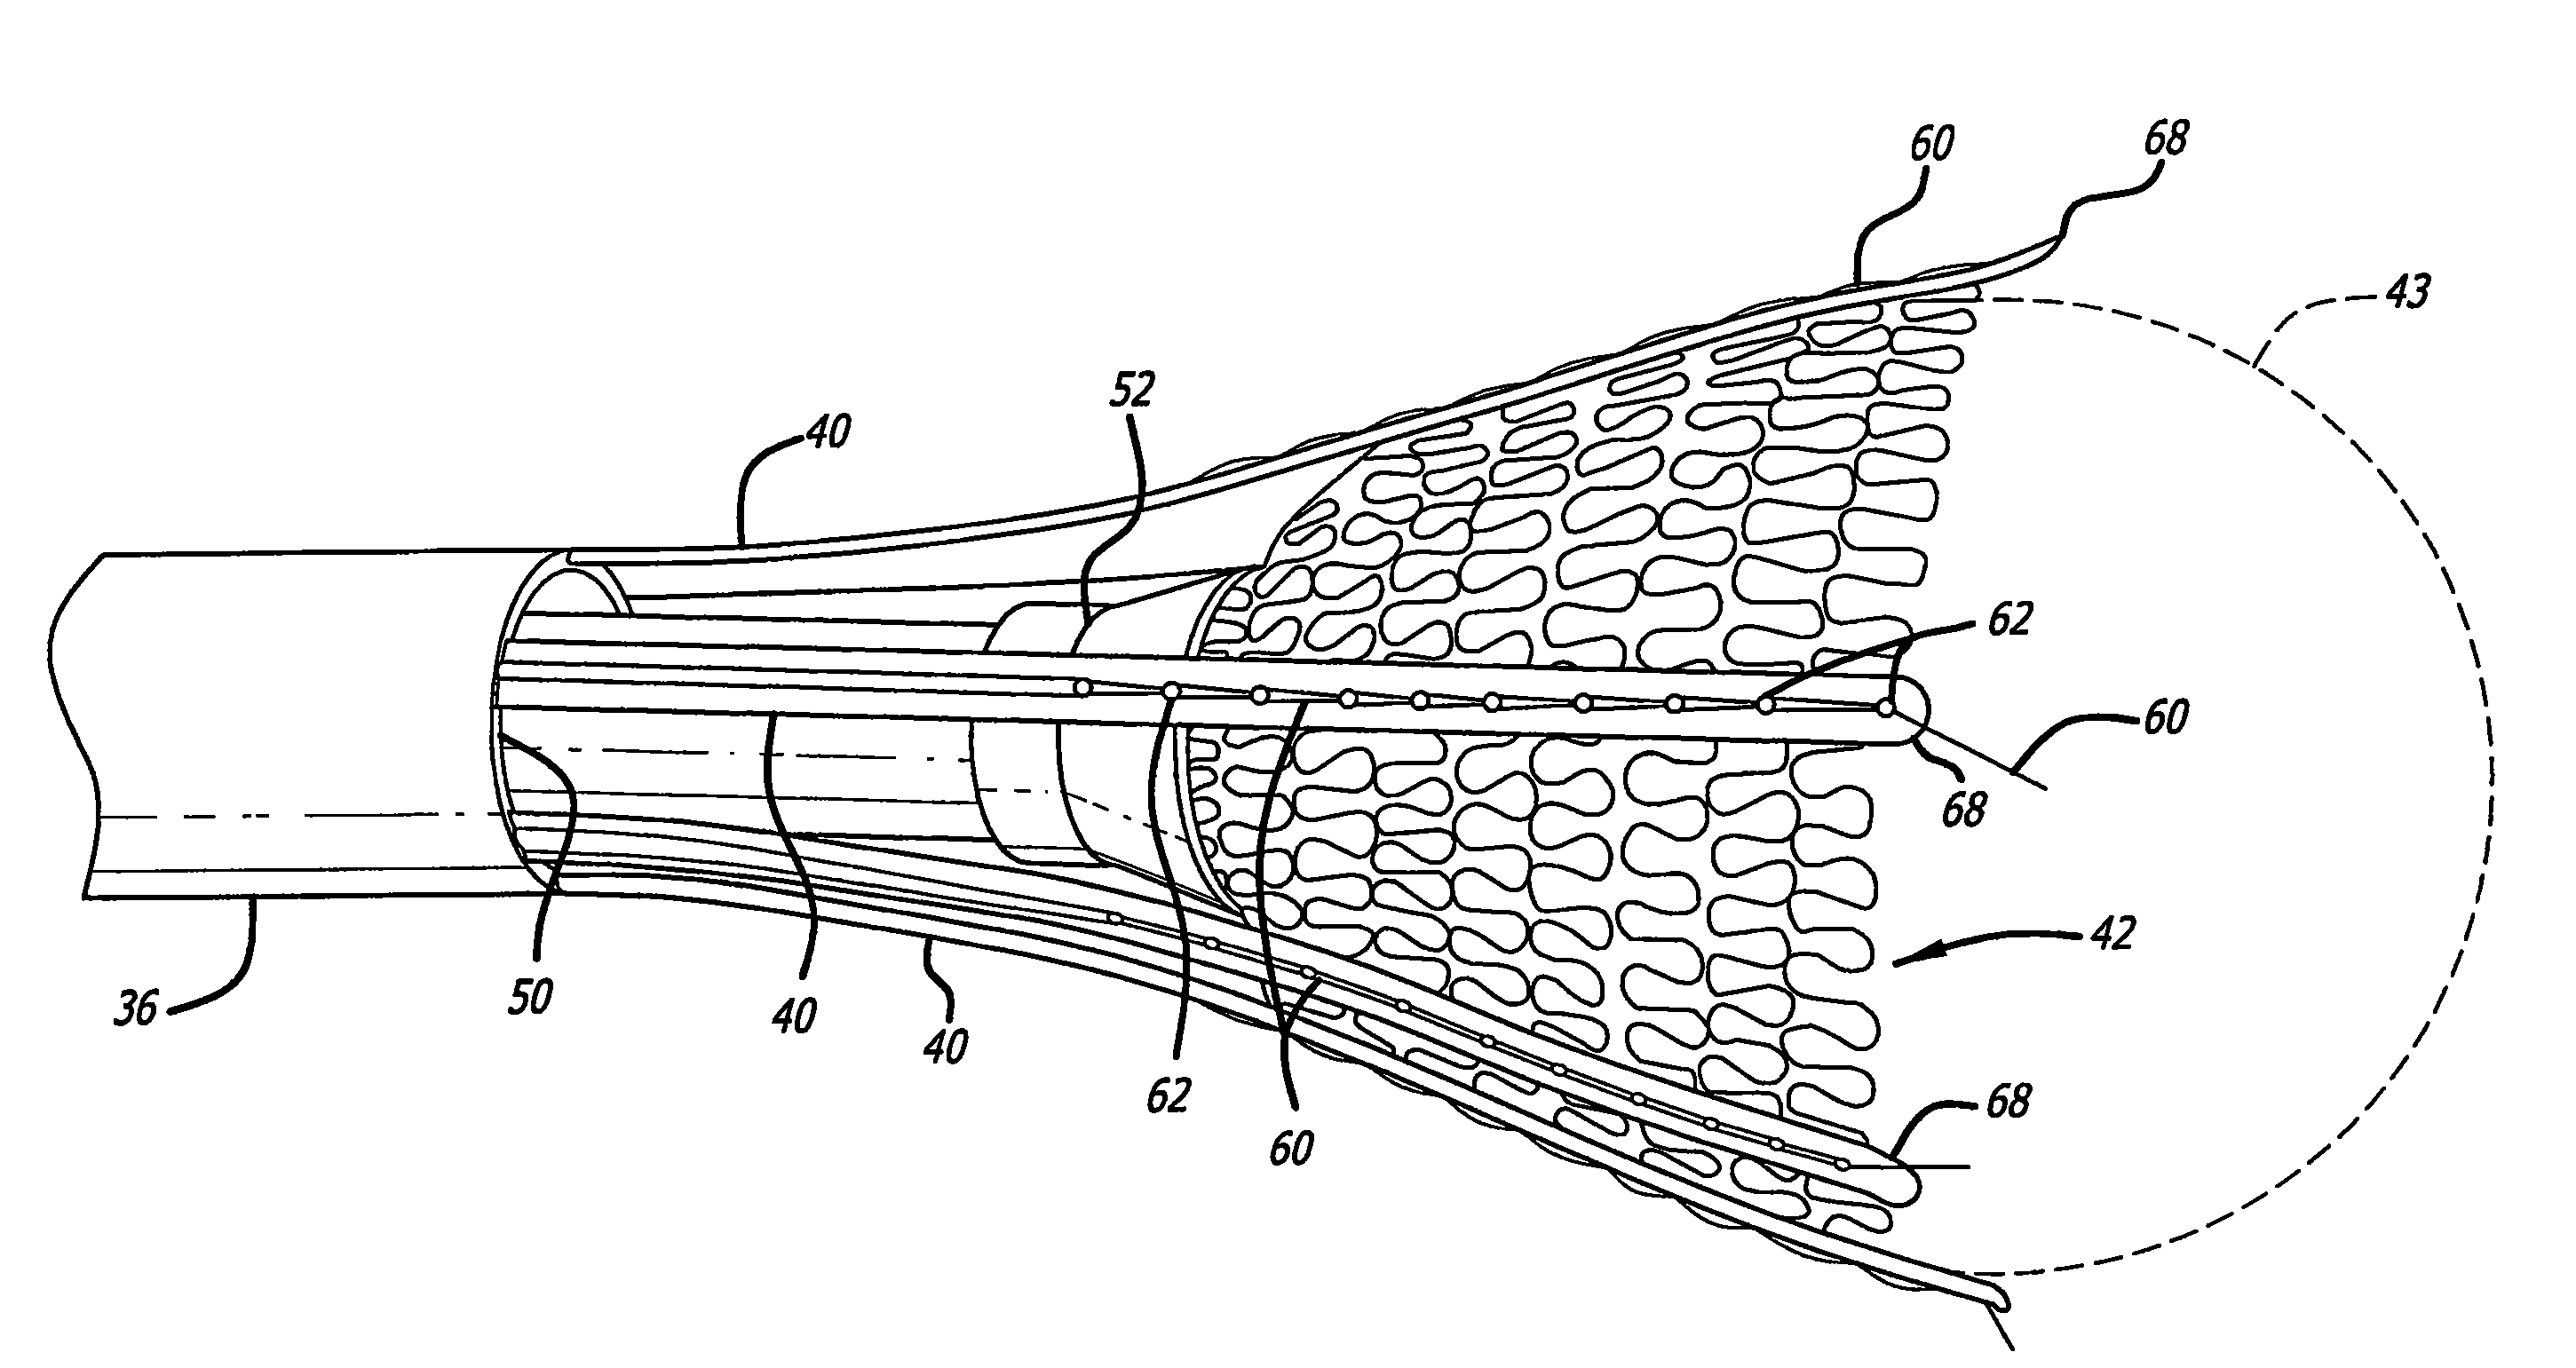 Cardiac harness delivery device